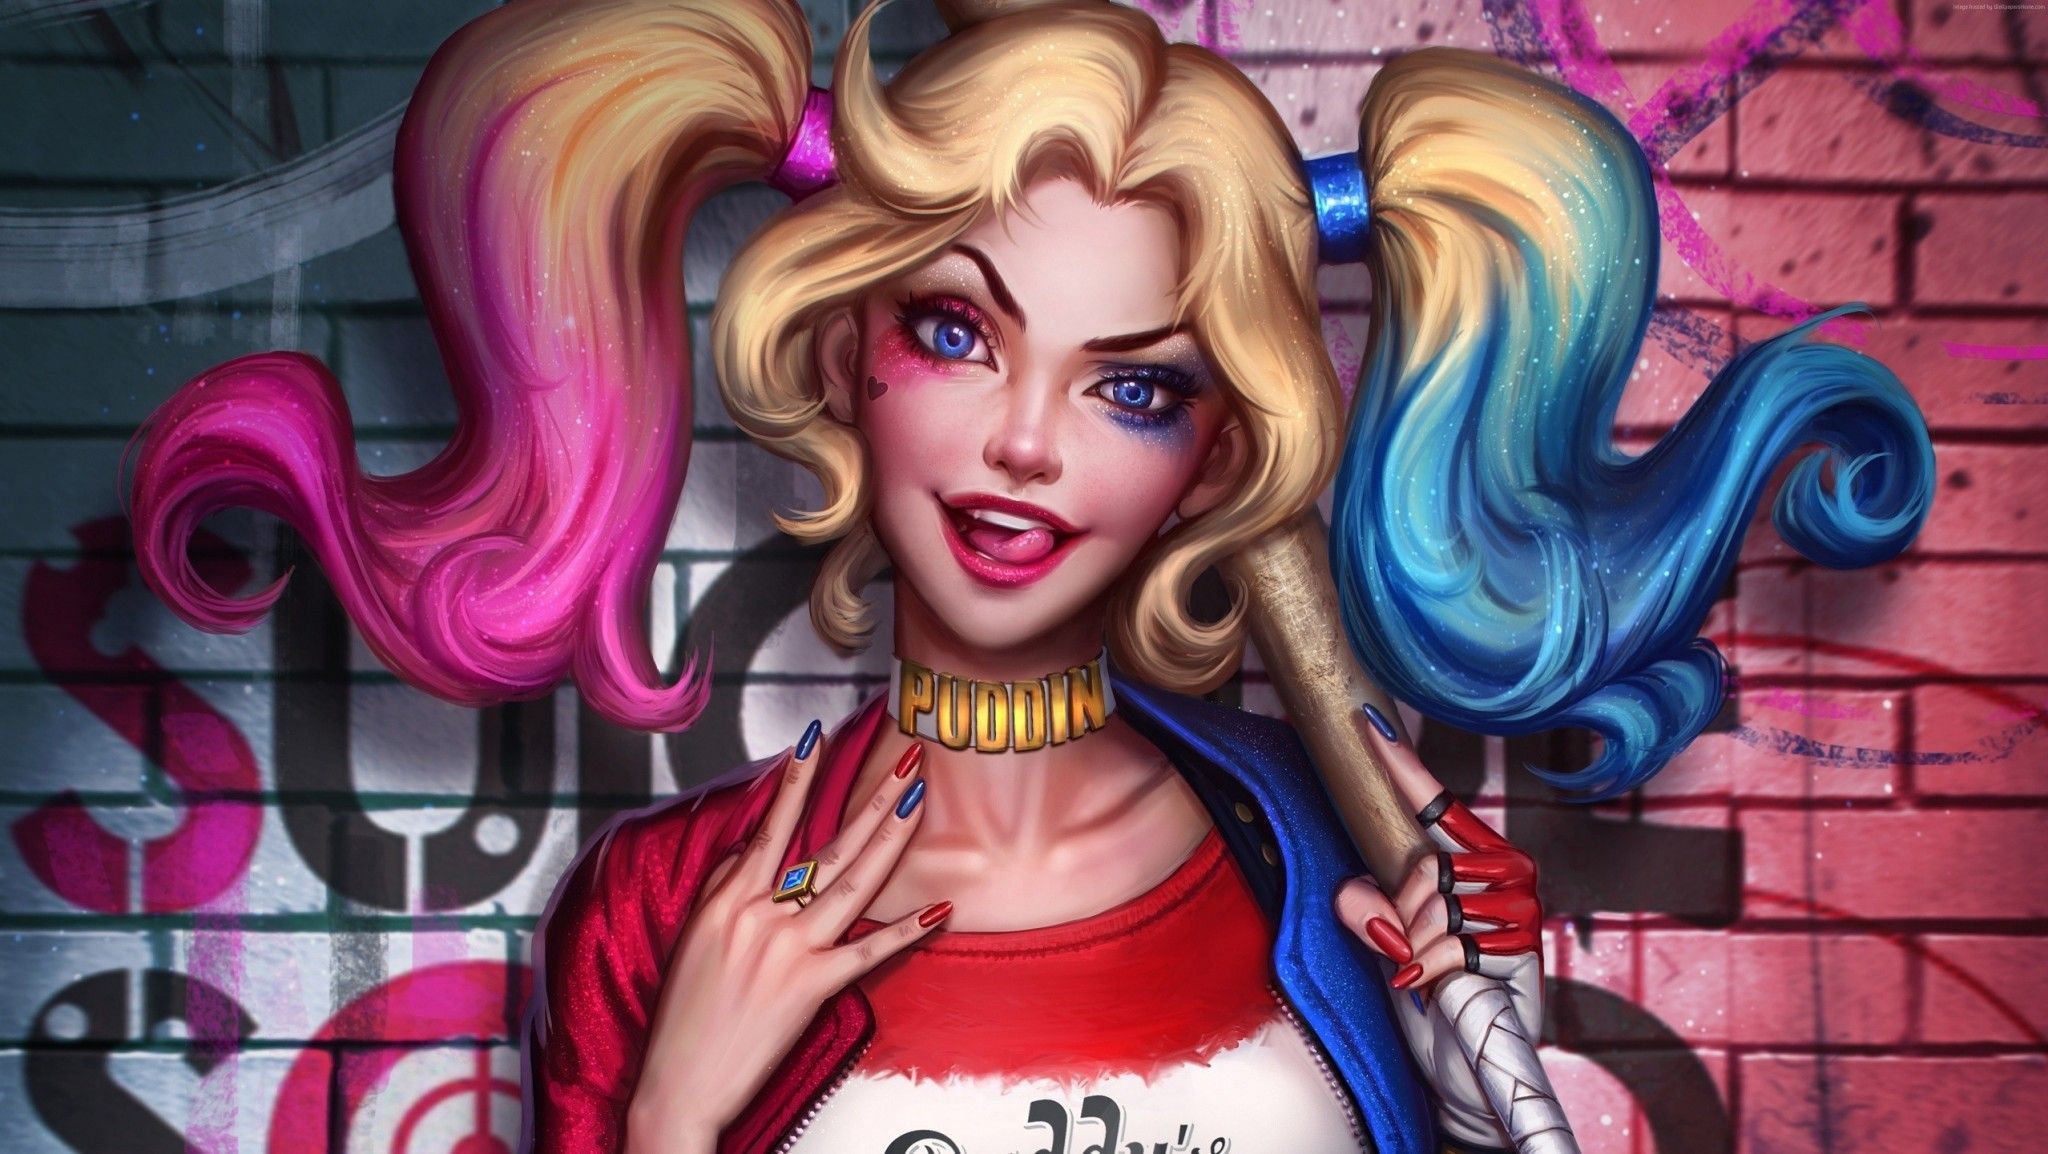 Art Harley Quinn Suicide Squad Wallpaper Free Art Harley Quinn Suicide Squad Background